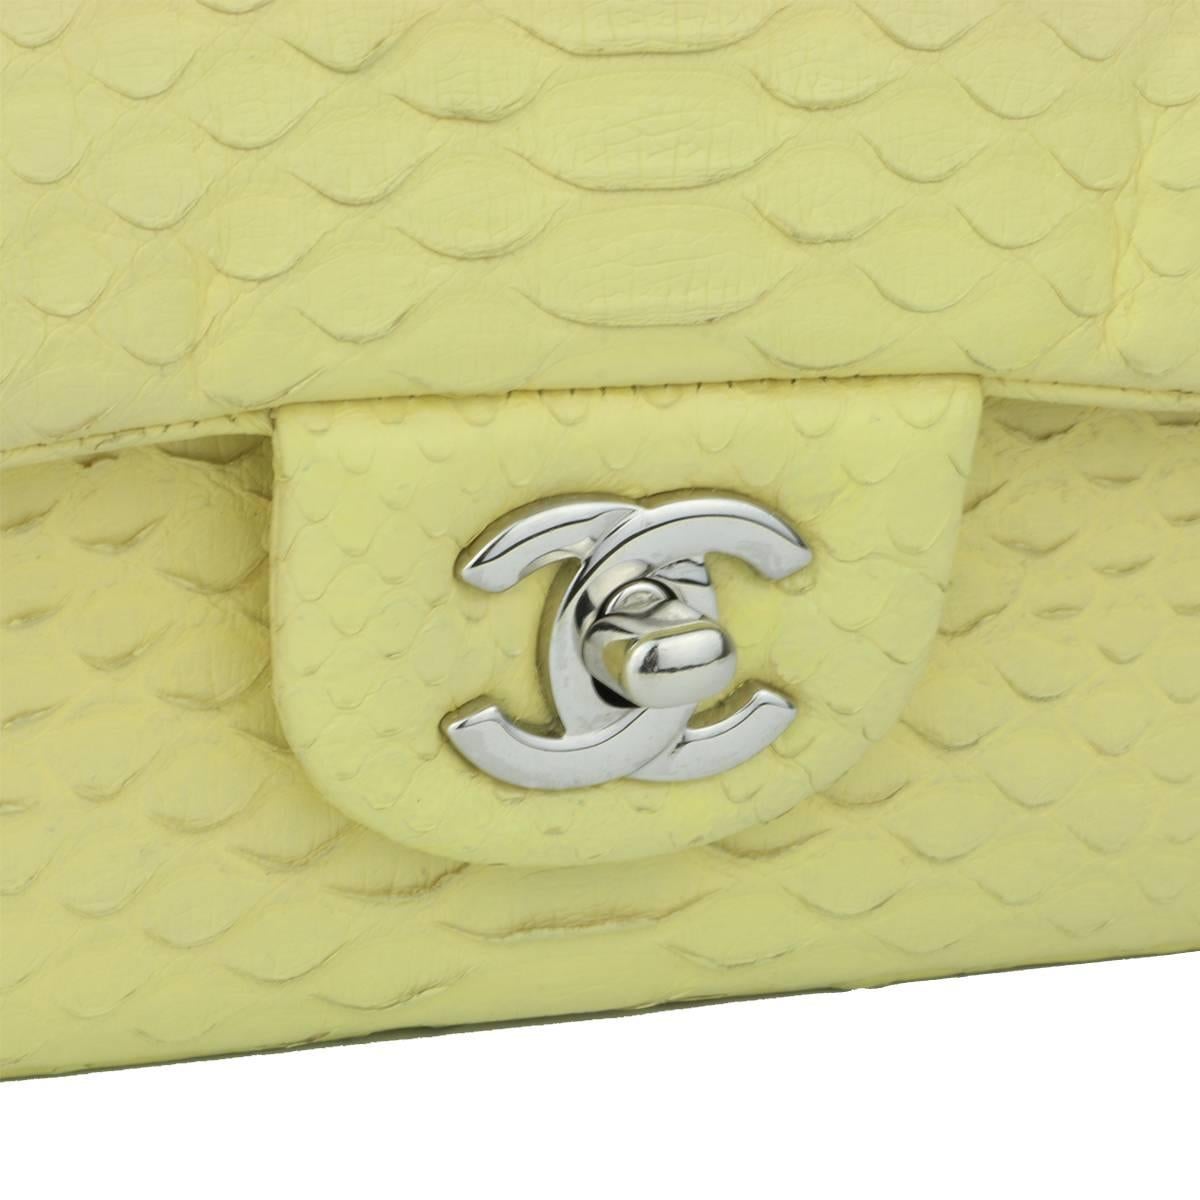 Authentic CHANEL Yellow Python Rectangular Mini with Silver Hardware 2014 Limited Edition.

This stunning bag is still in Excellent condition. The bag still holds its original shape and hardware still shiny.

Exterior Condition: Excellent condition.